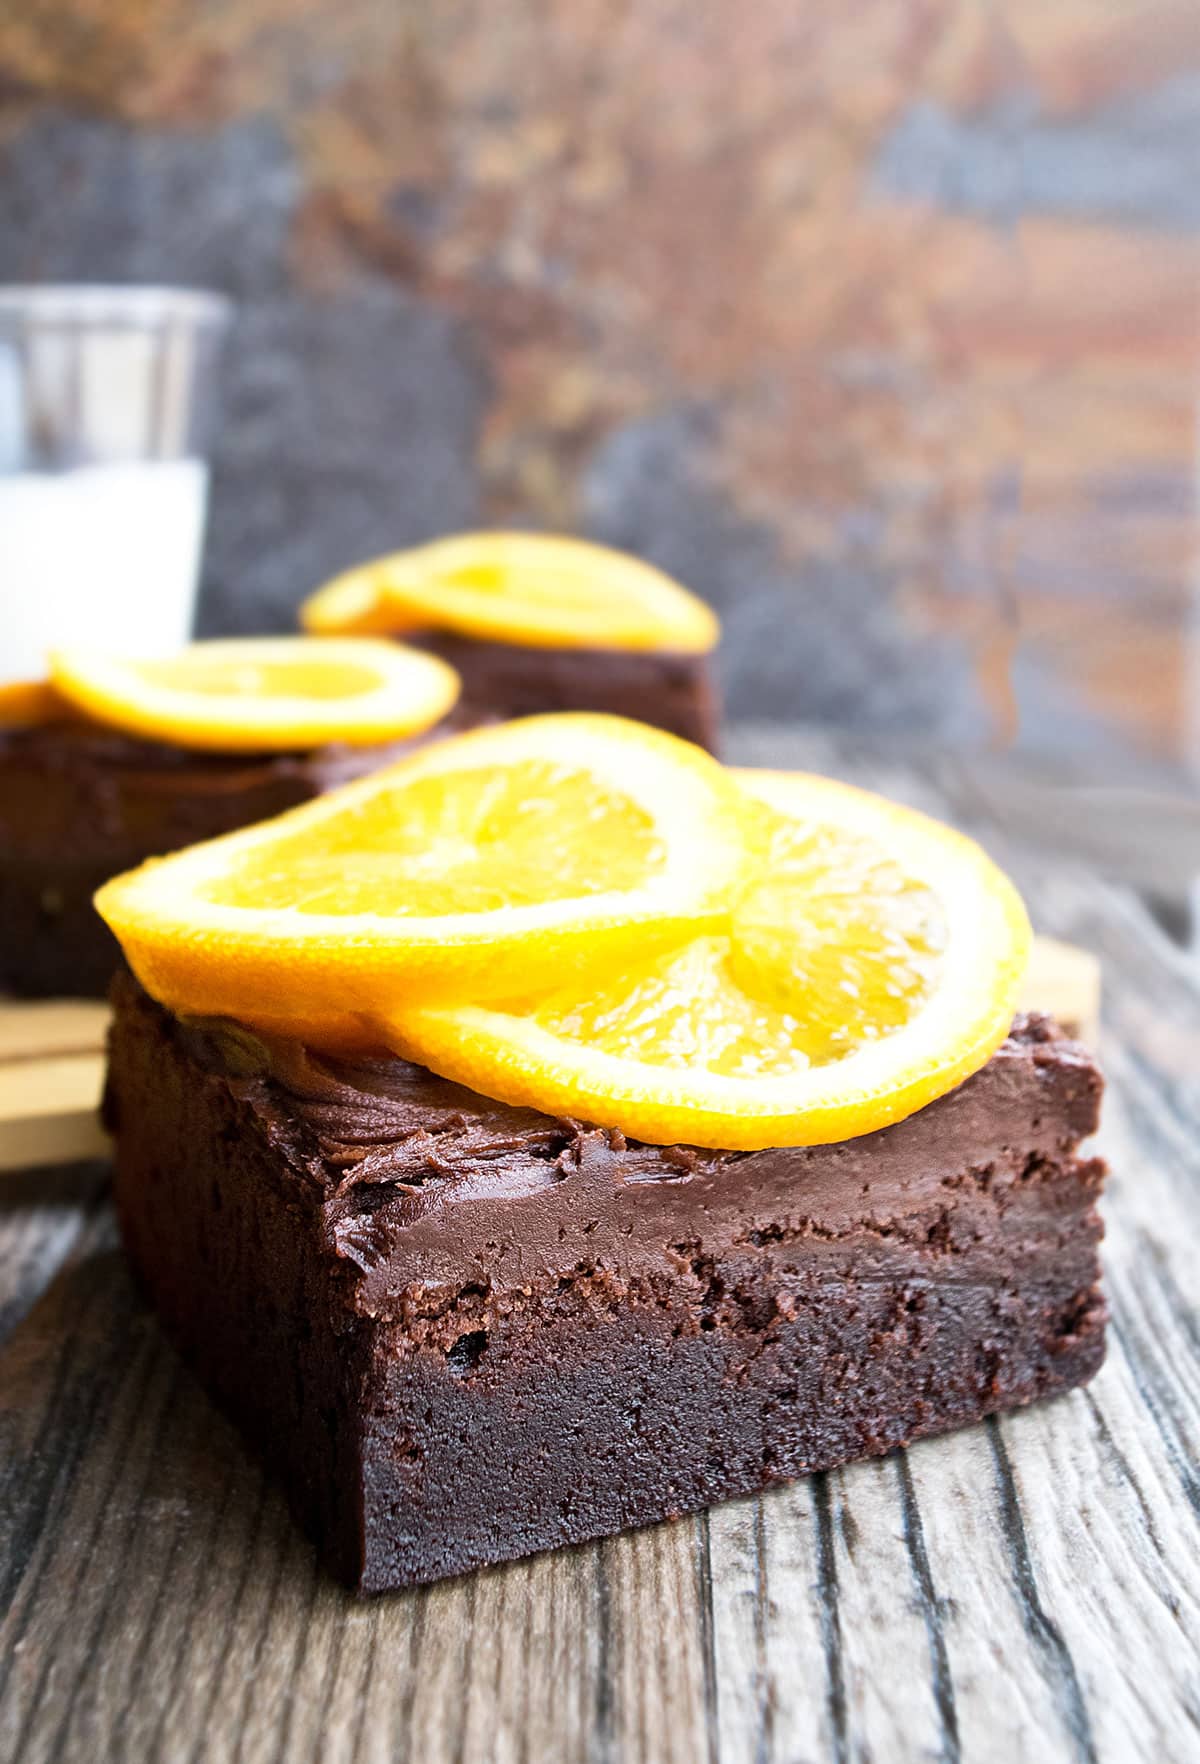 Slice of Chocolate Orange Brownies With Chocolate Buttercream Frosting and Fresh Orange Slices. 